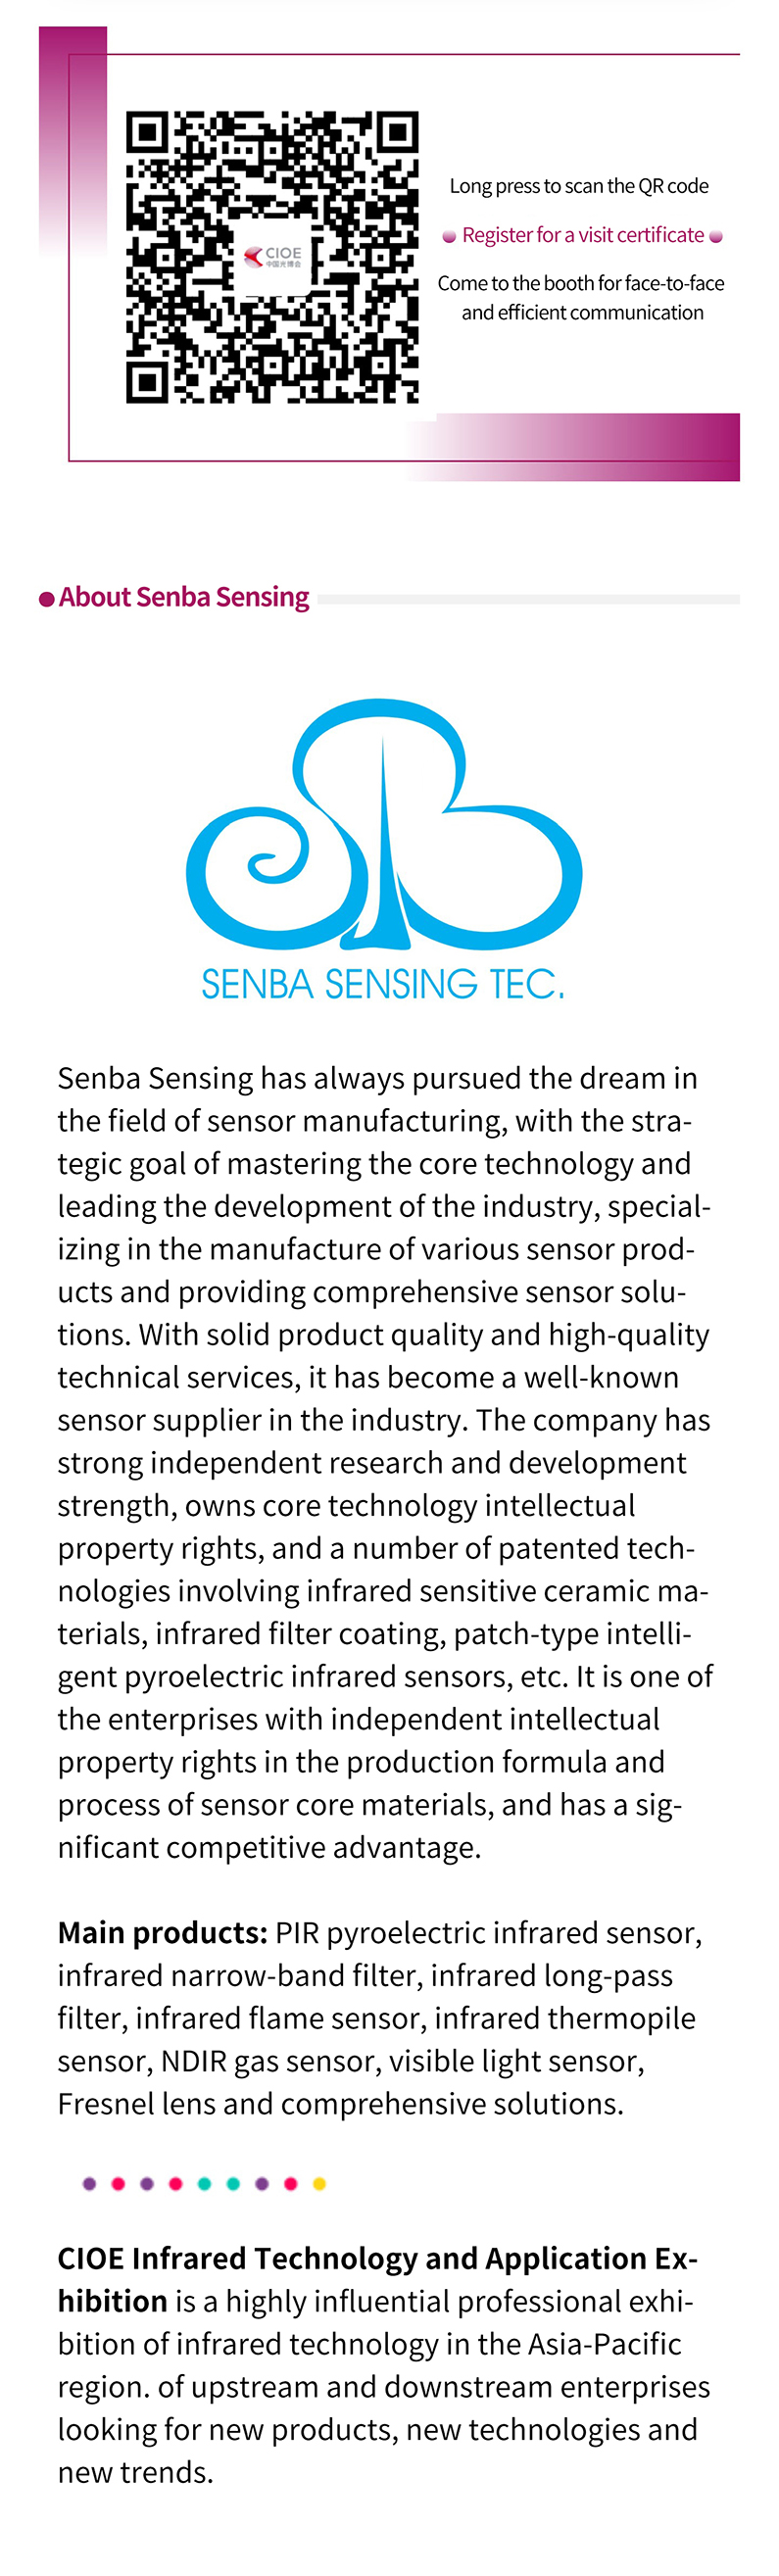 Mastering a number of core technology patents in the sensor field, Senba Sensing will debut at CIOE 2022